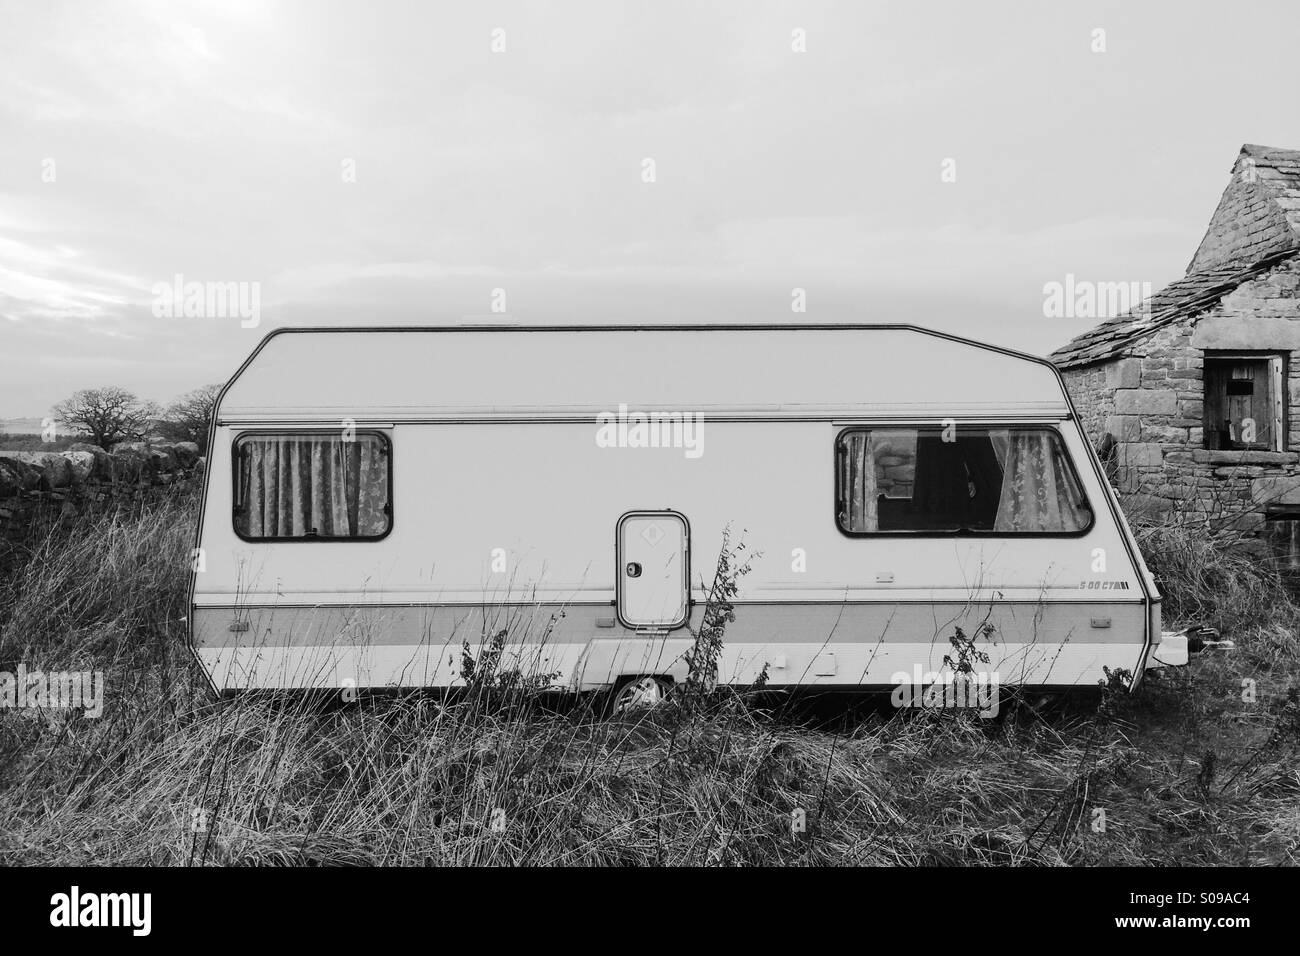 An abandoned caravan or camper trailer in black and white in rural England. Stock Photo